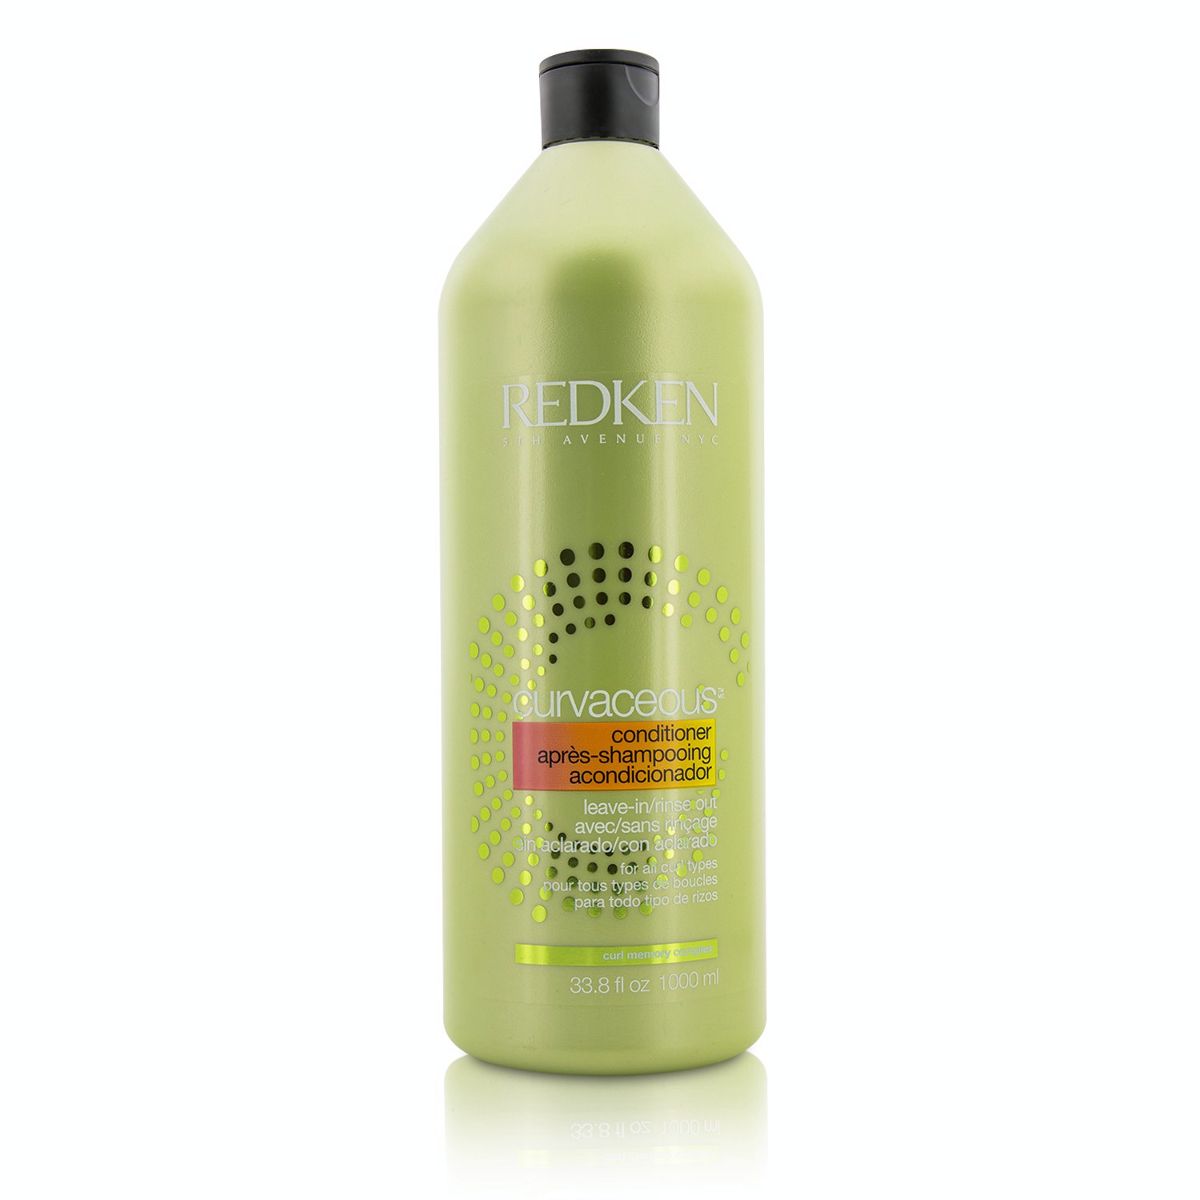 Curvaceous Conditioner - Leave-In/Rinse-Out (For All Curl Types) Redken Image